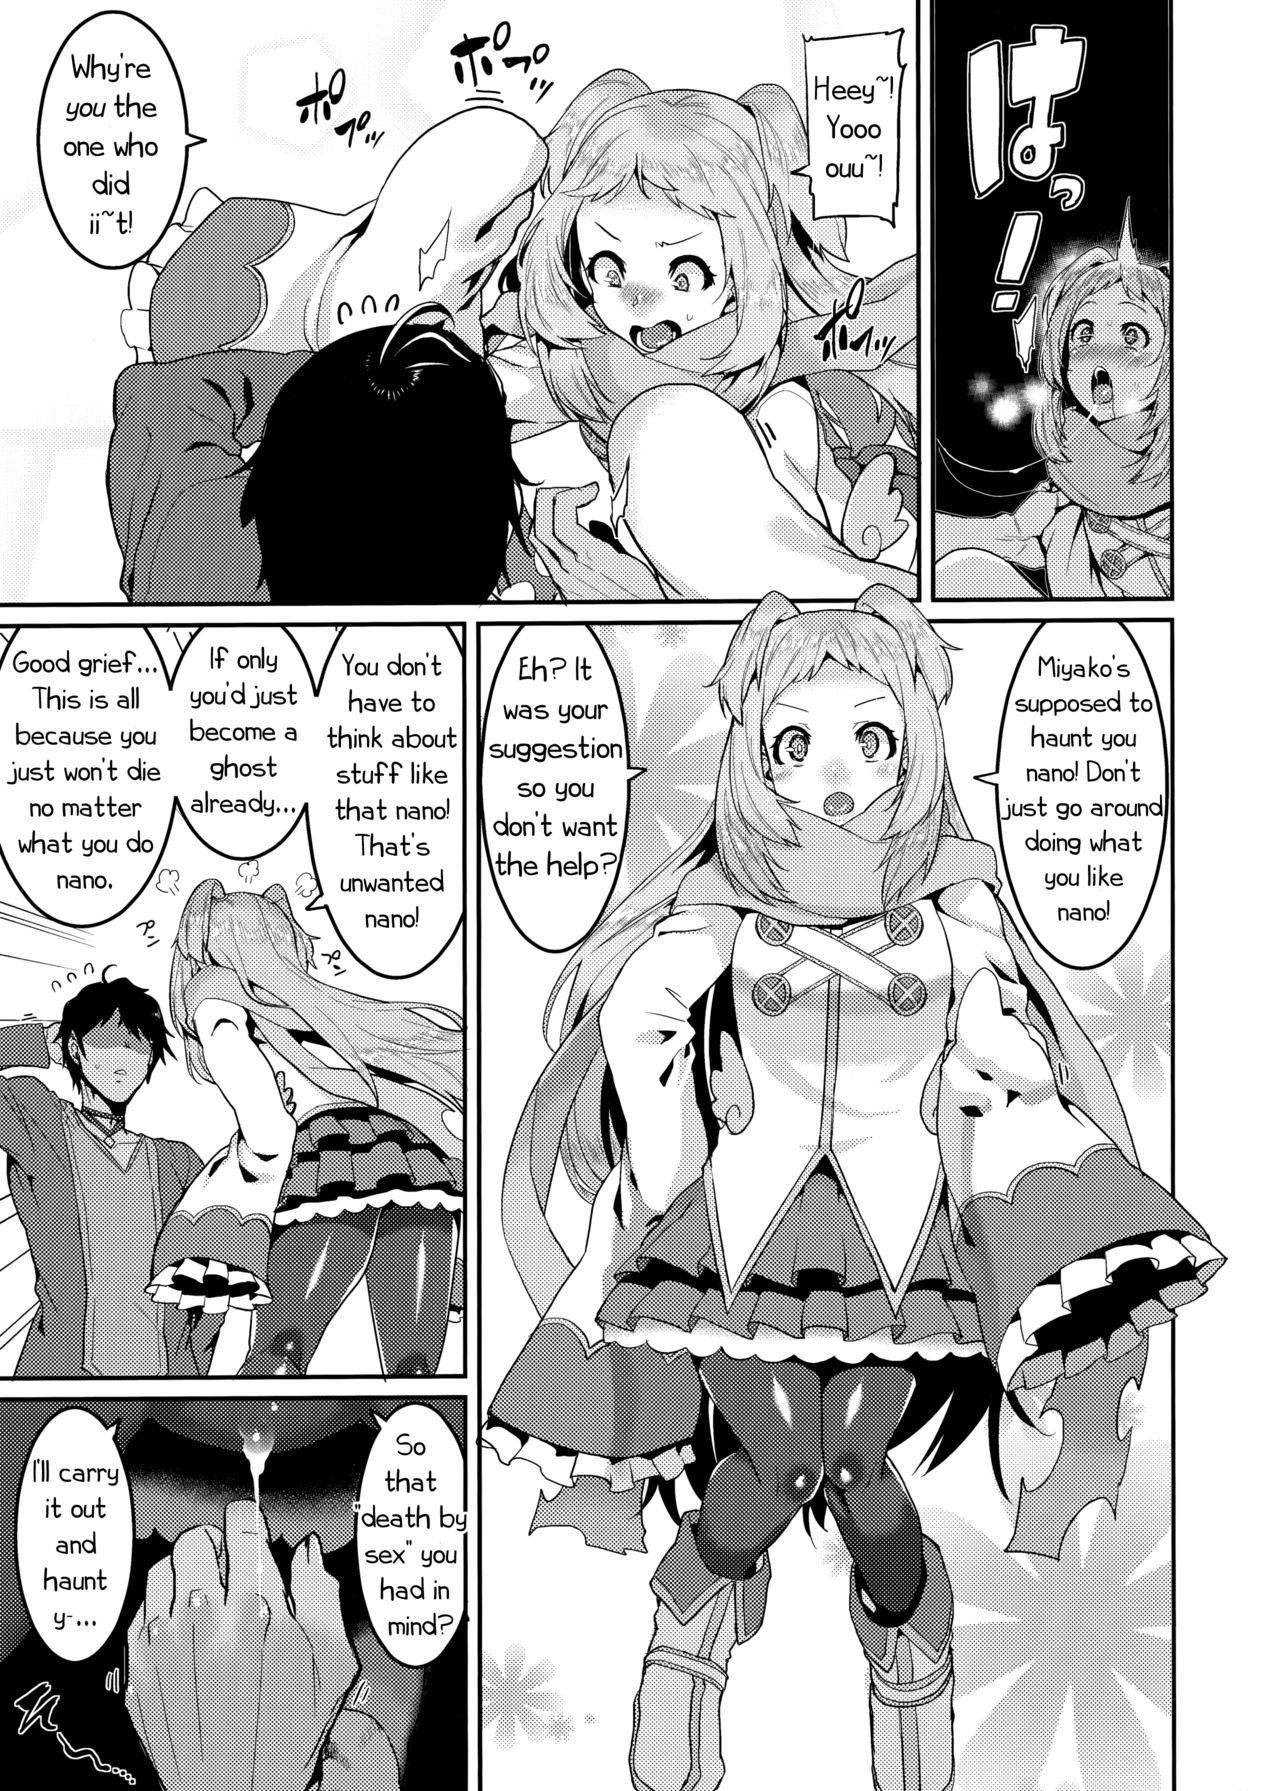 Denmark Pudding Switch - Princess connect Teenie - Page 7